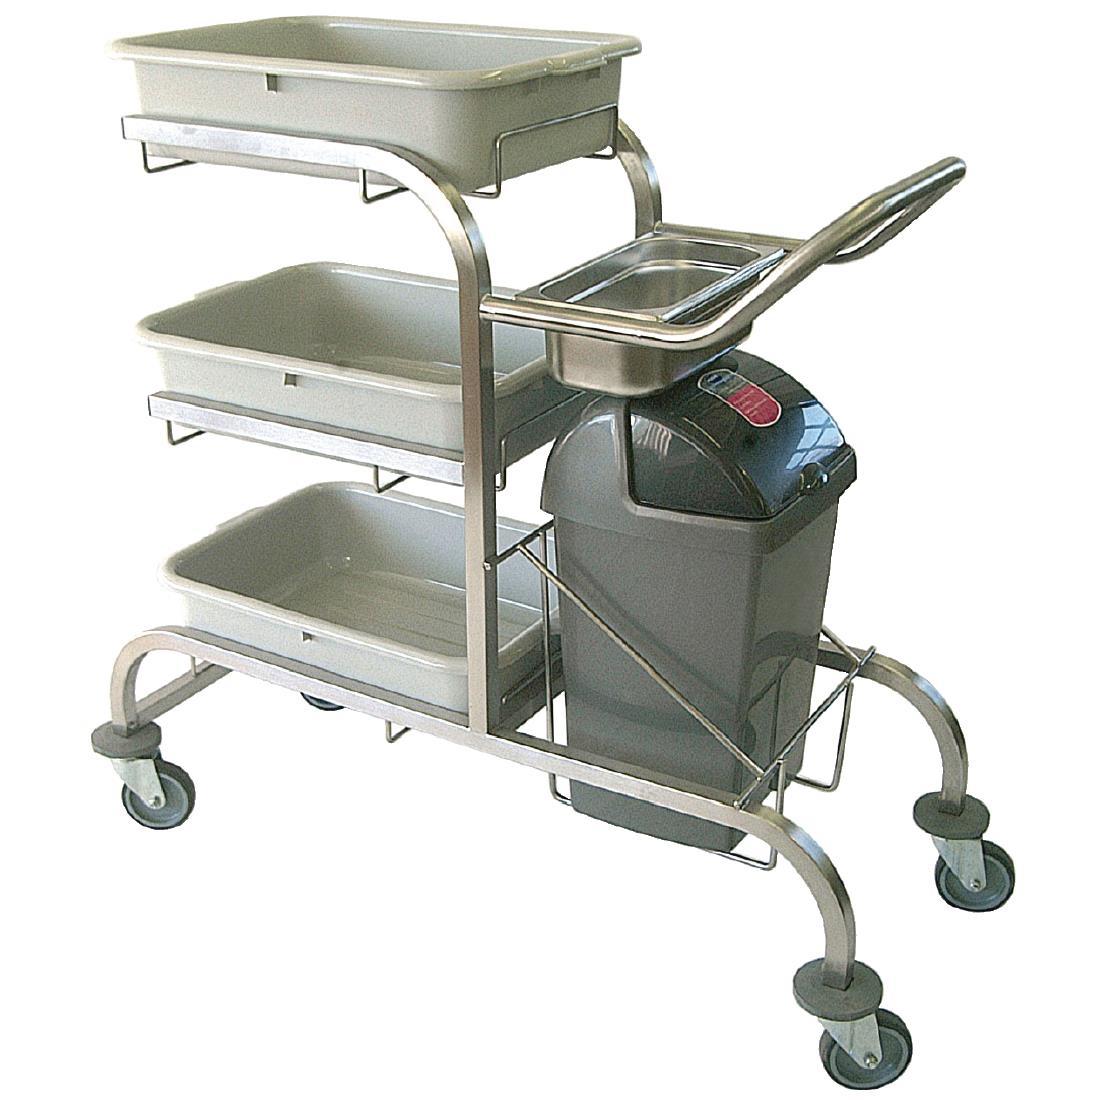 Craven 3 Tier Stainless Steel Bussing Trolley - DL455  - 1